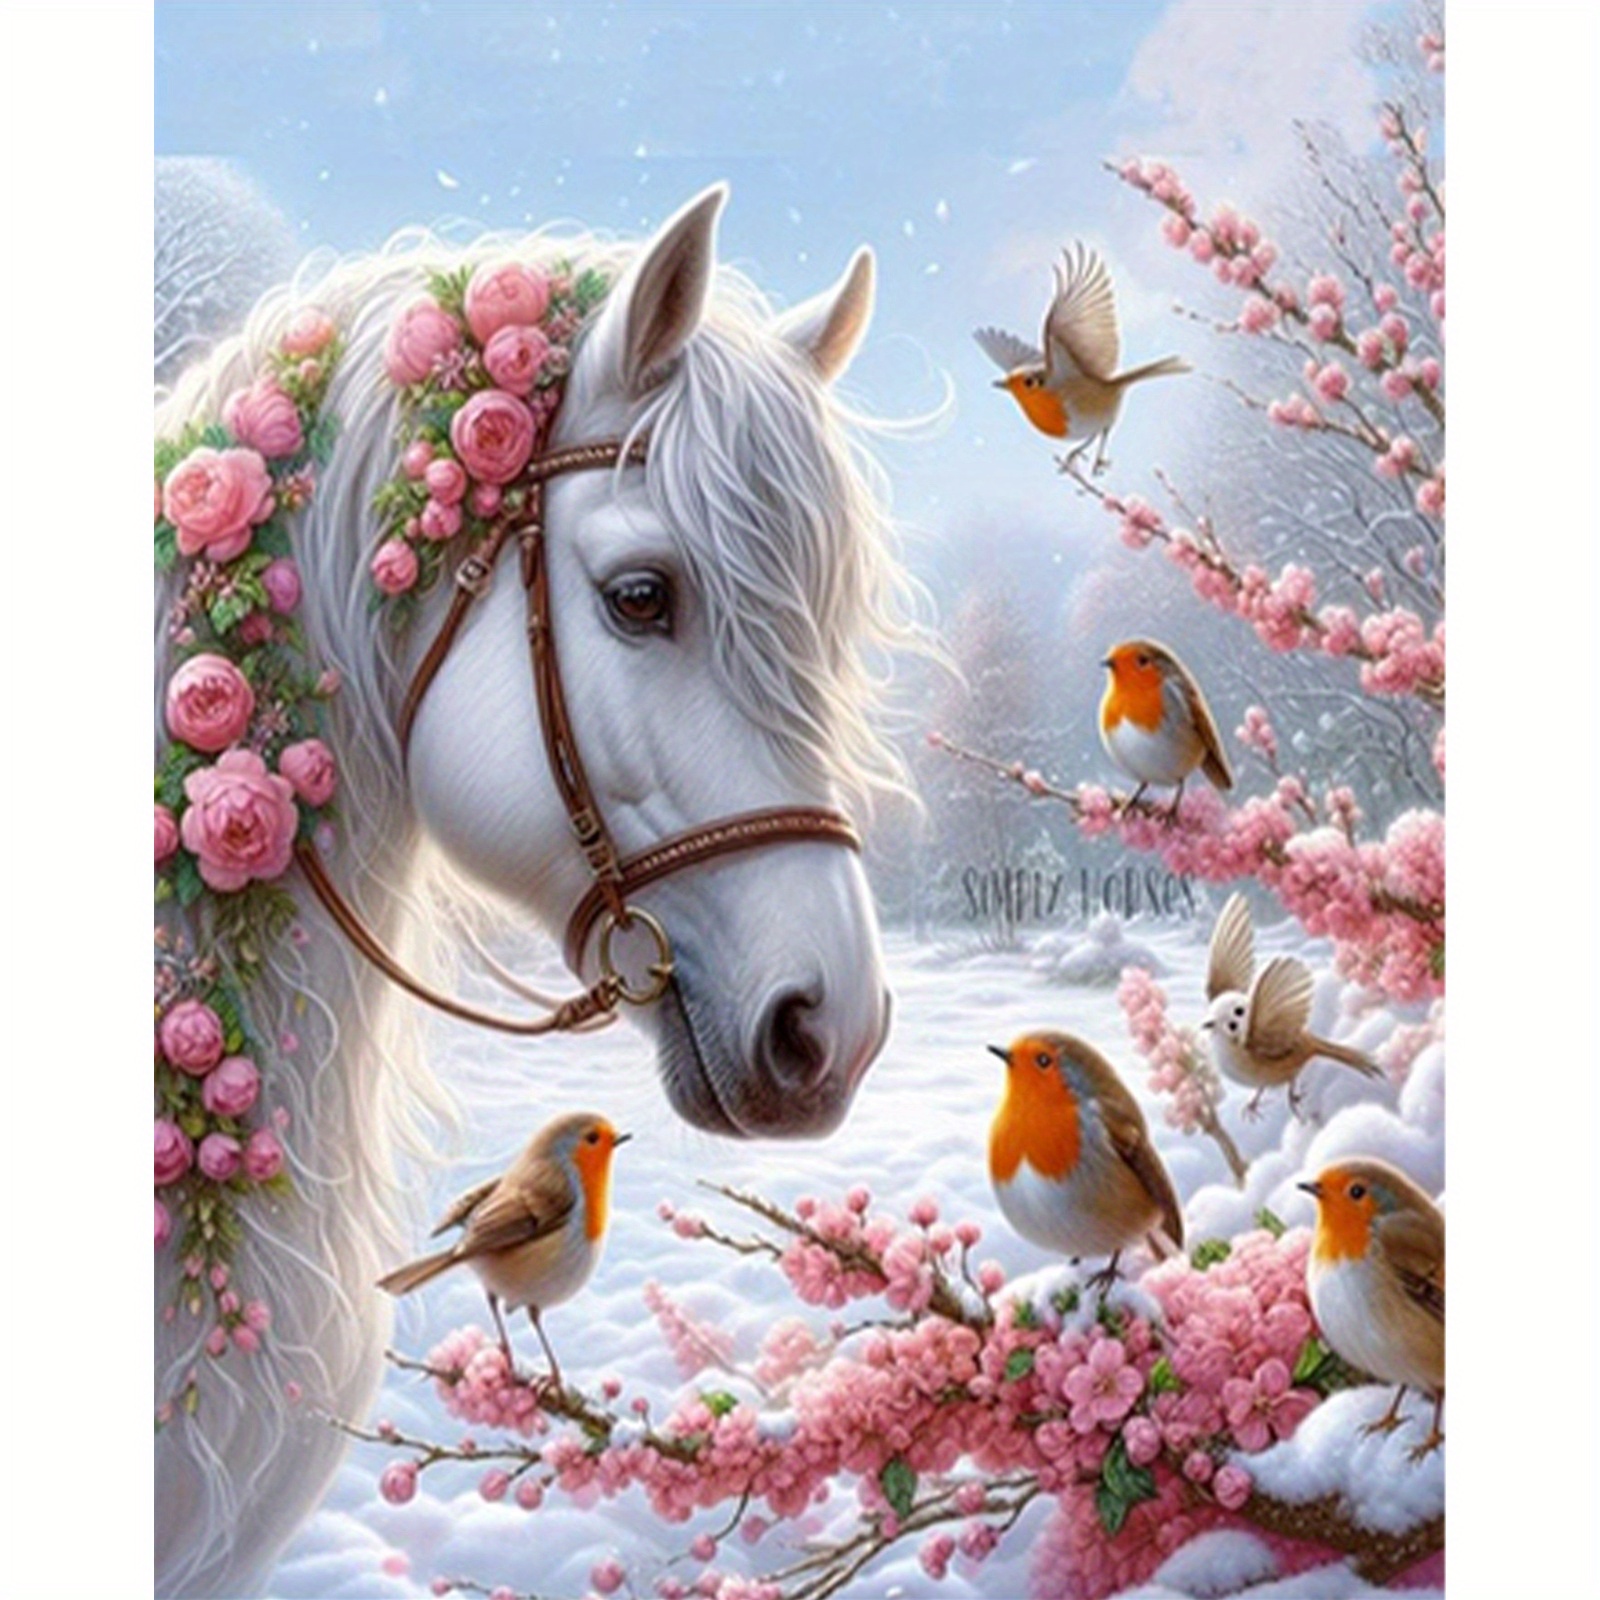 

5d Diamond Painting Kit With Round Diamonds - Full Drill Canvas Crafts, Horse And Snow Scene Mosaic Art For Home Office Decor, Animal Themed Diy Project For Adults